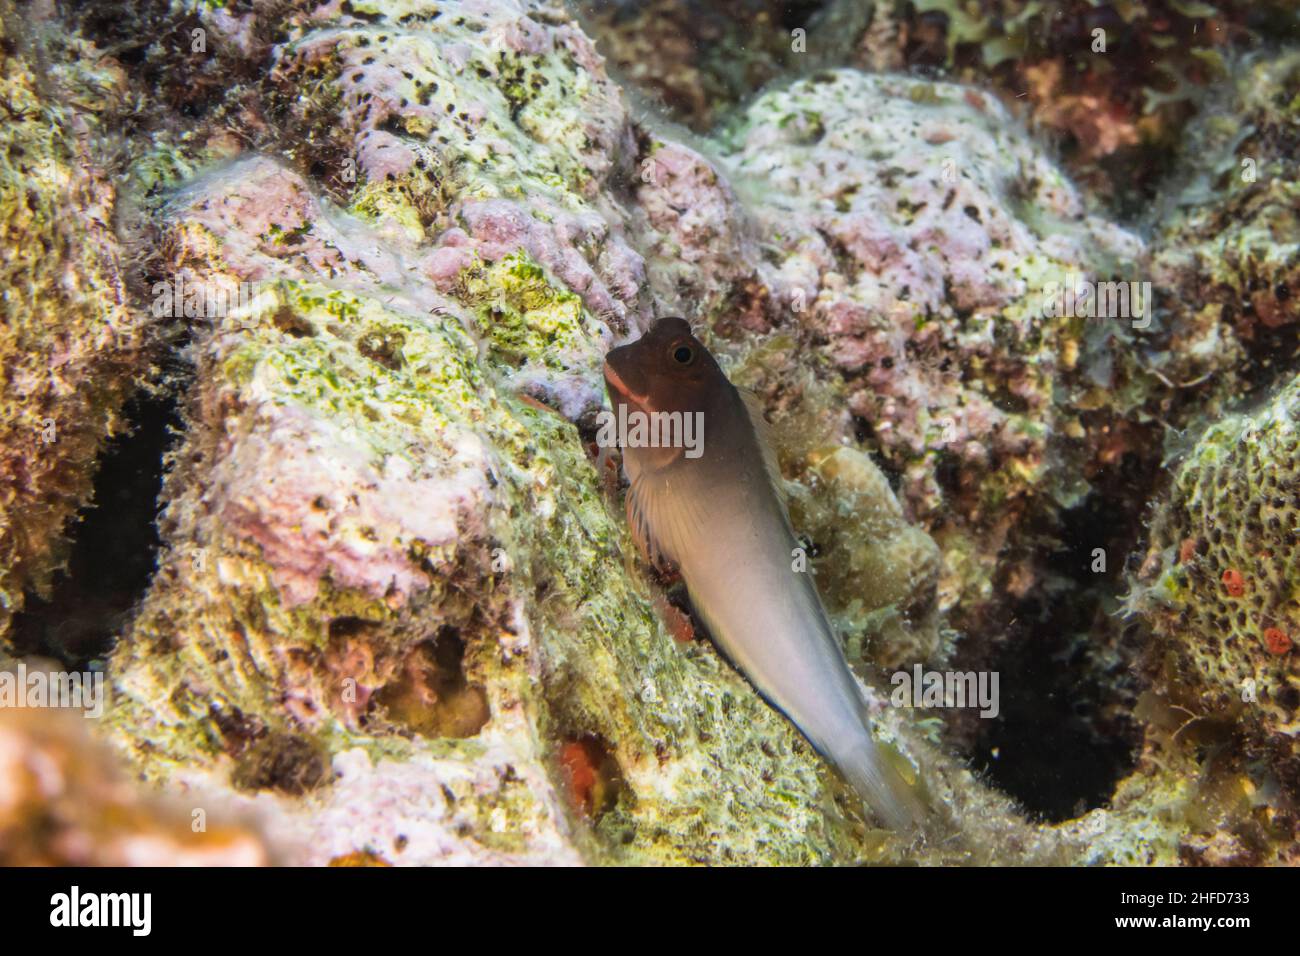 Seascape with Redlip Blenny, coral, and sponge in the coral reef of the Caribbean Sea, Curacao Stock Photo